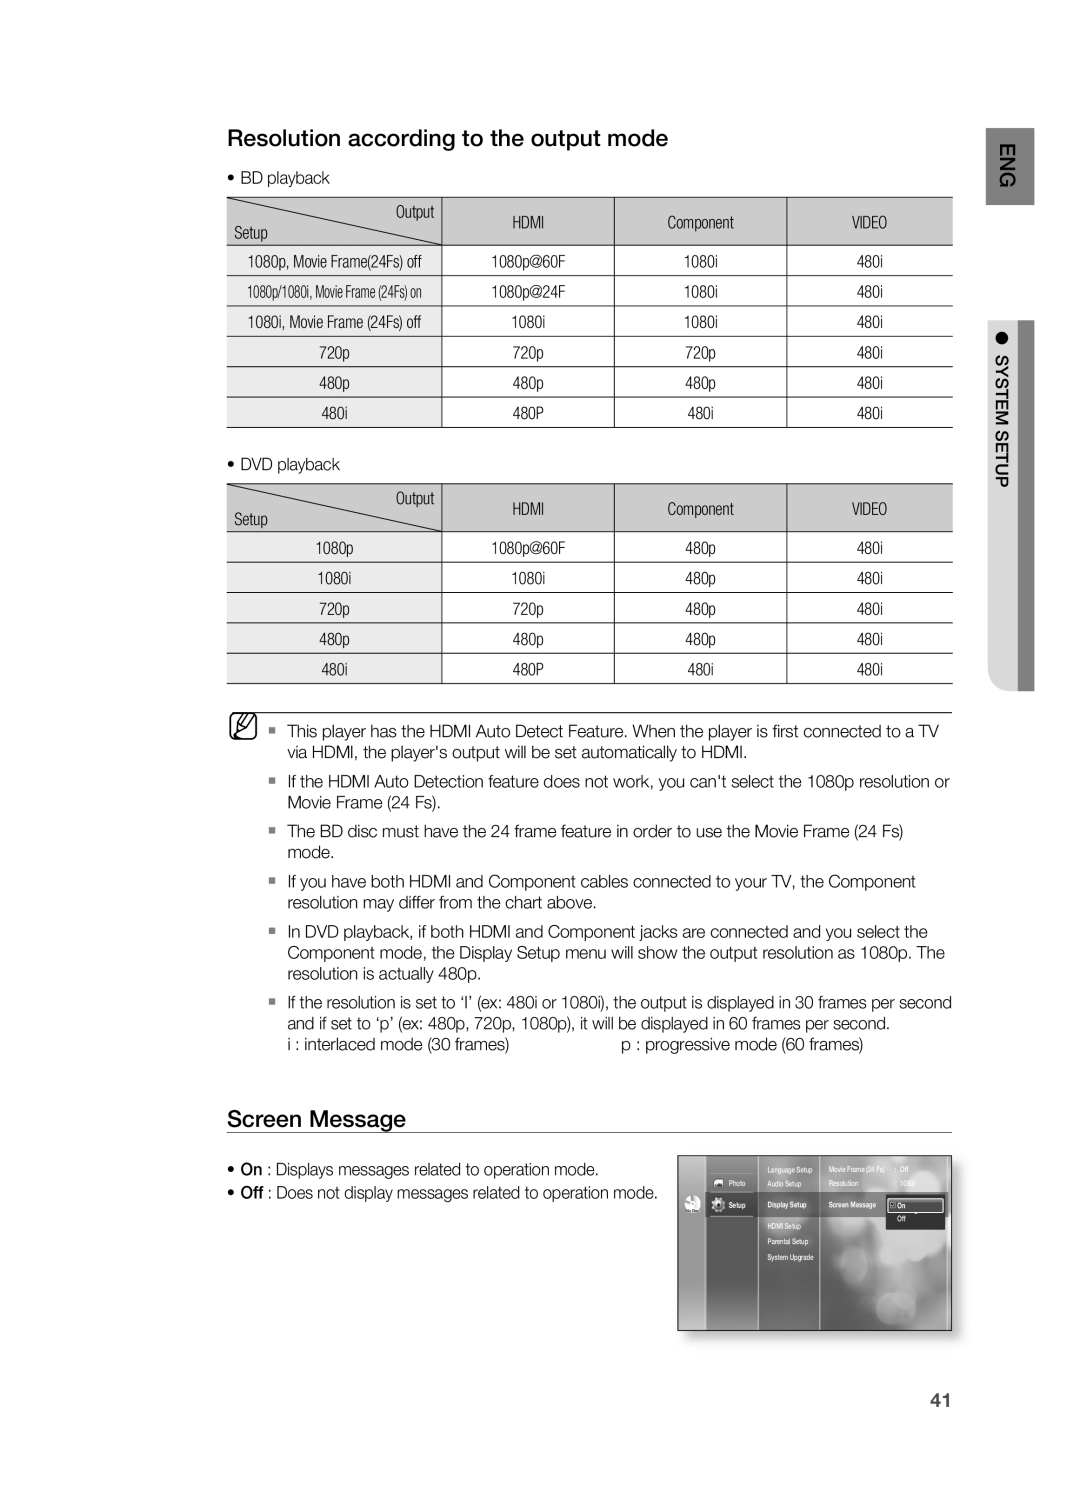 Samsung HT-BD2S manual Resolution according to the output mode, Screen Message 